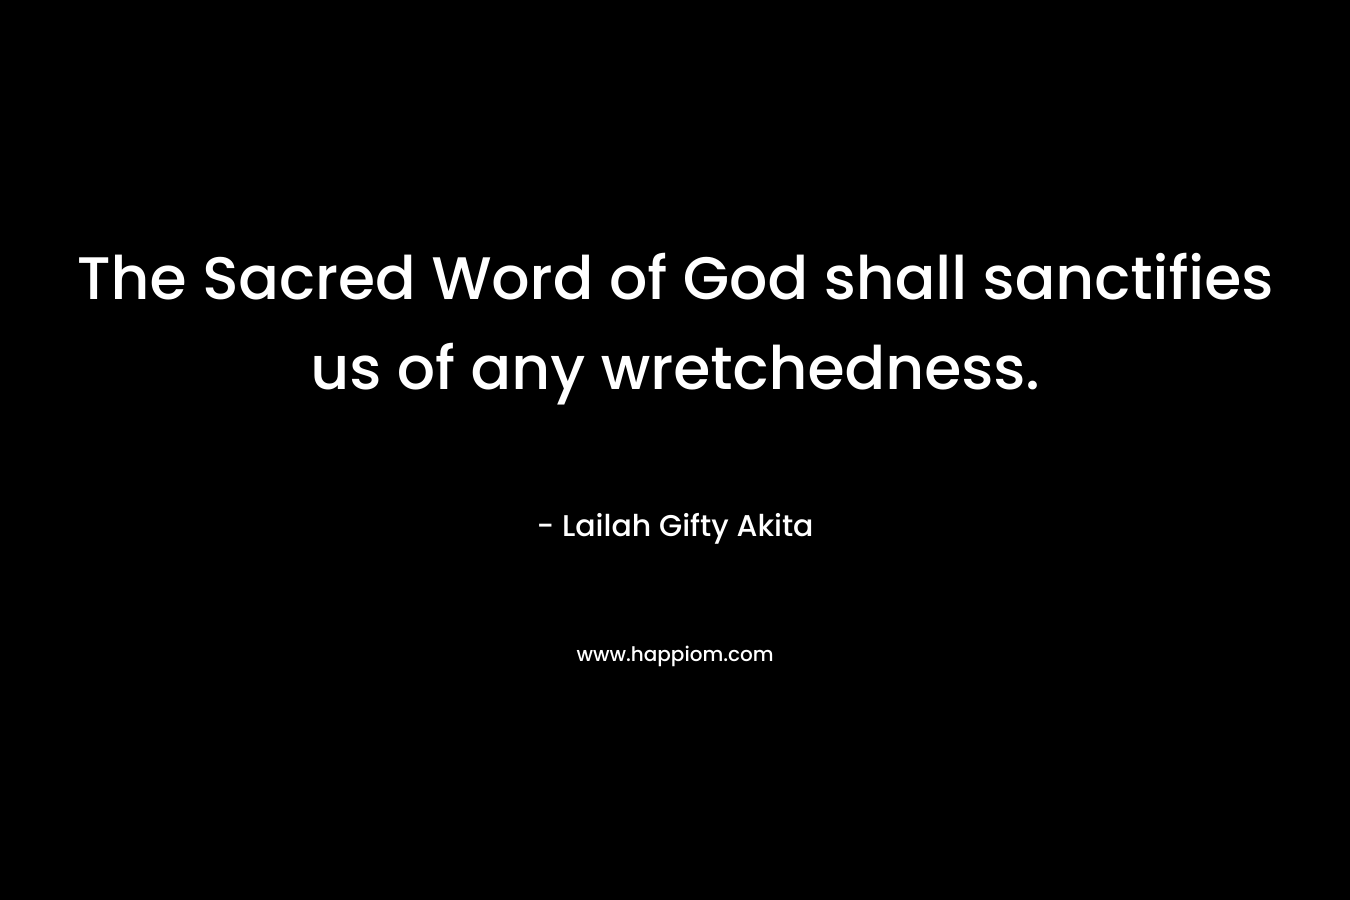 The Sacred Word of God shall sanctifies us of any wretchedness.